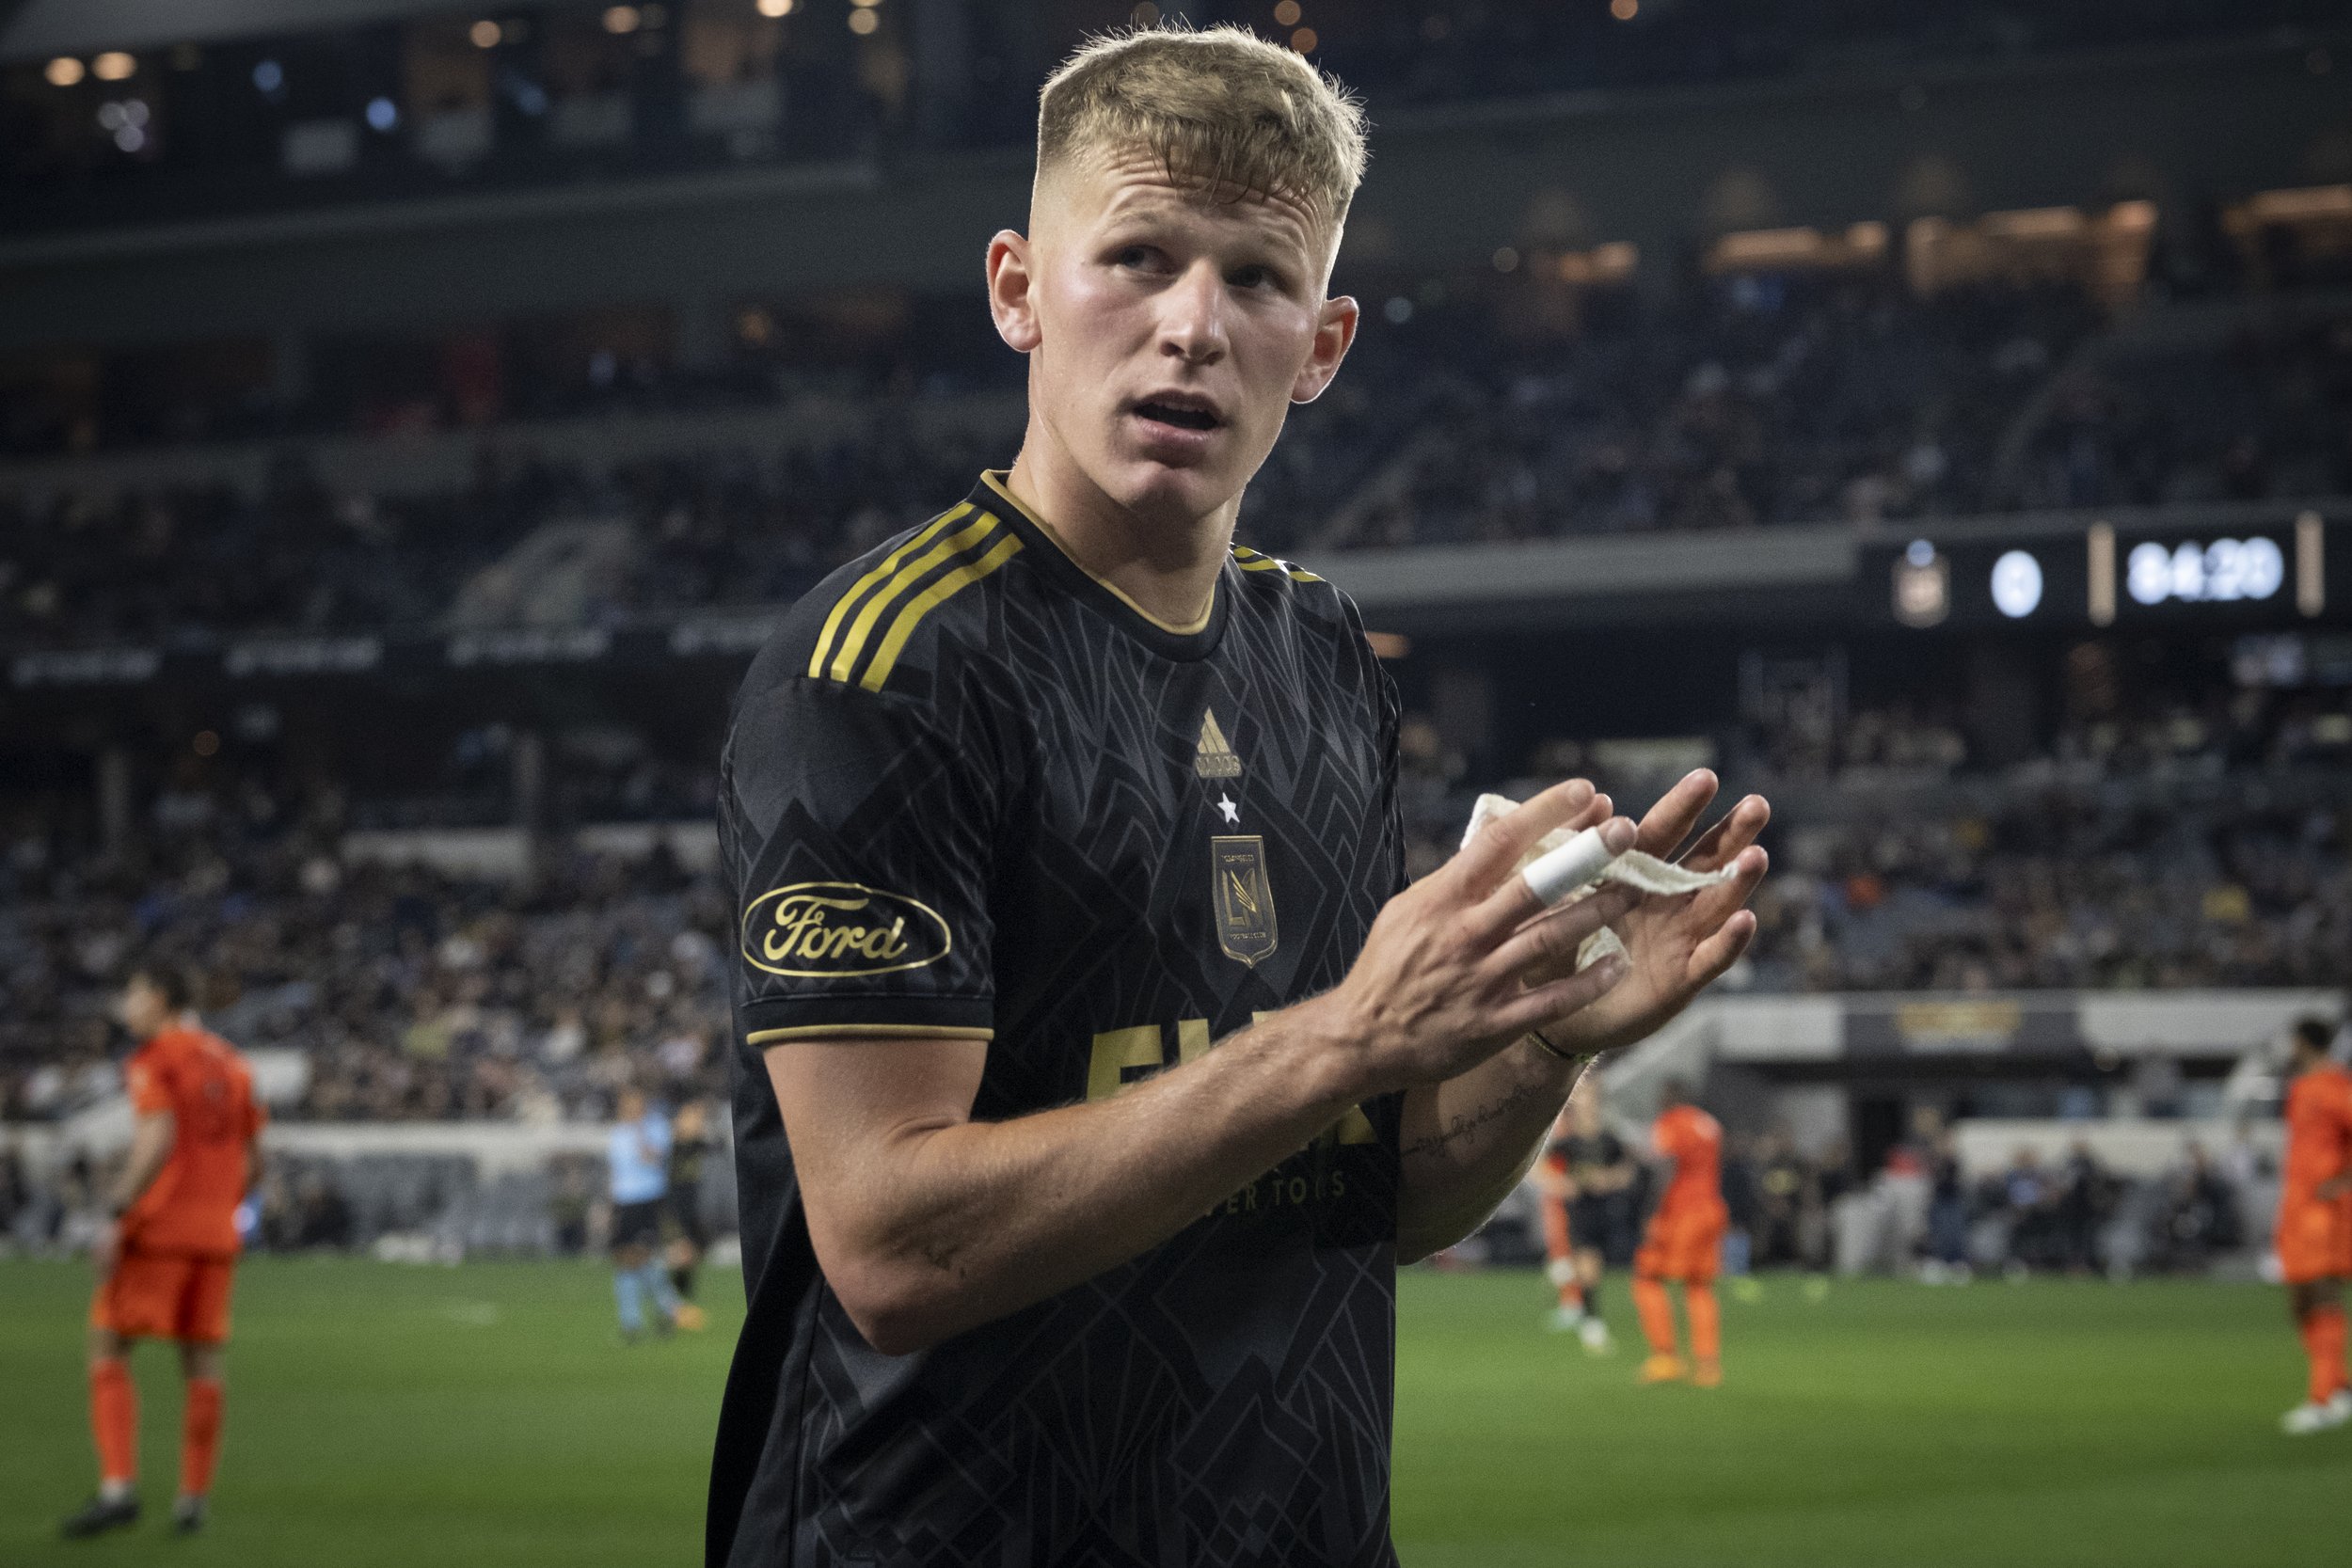  Mateusz Bogusz, Midfielder #19 of LAFC walks off the field. Los Angeles Football Club (LAFC) and Houston Dynamo FC faced off in a Major League Soccer (MLS) match on Wednesday, June 14, at the Bank of Montreal (BMO) Stadium in Los Angeles, California